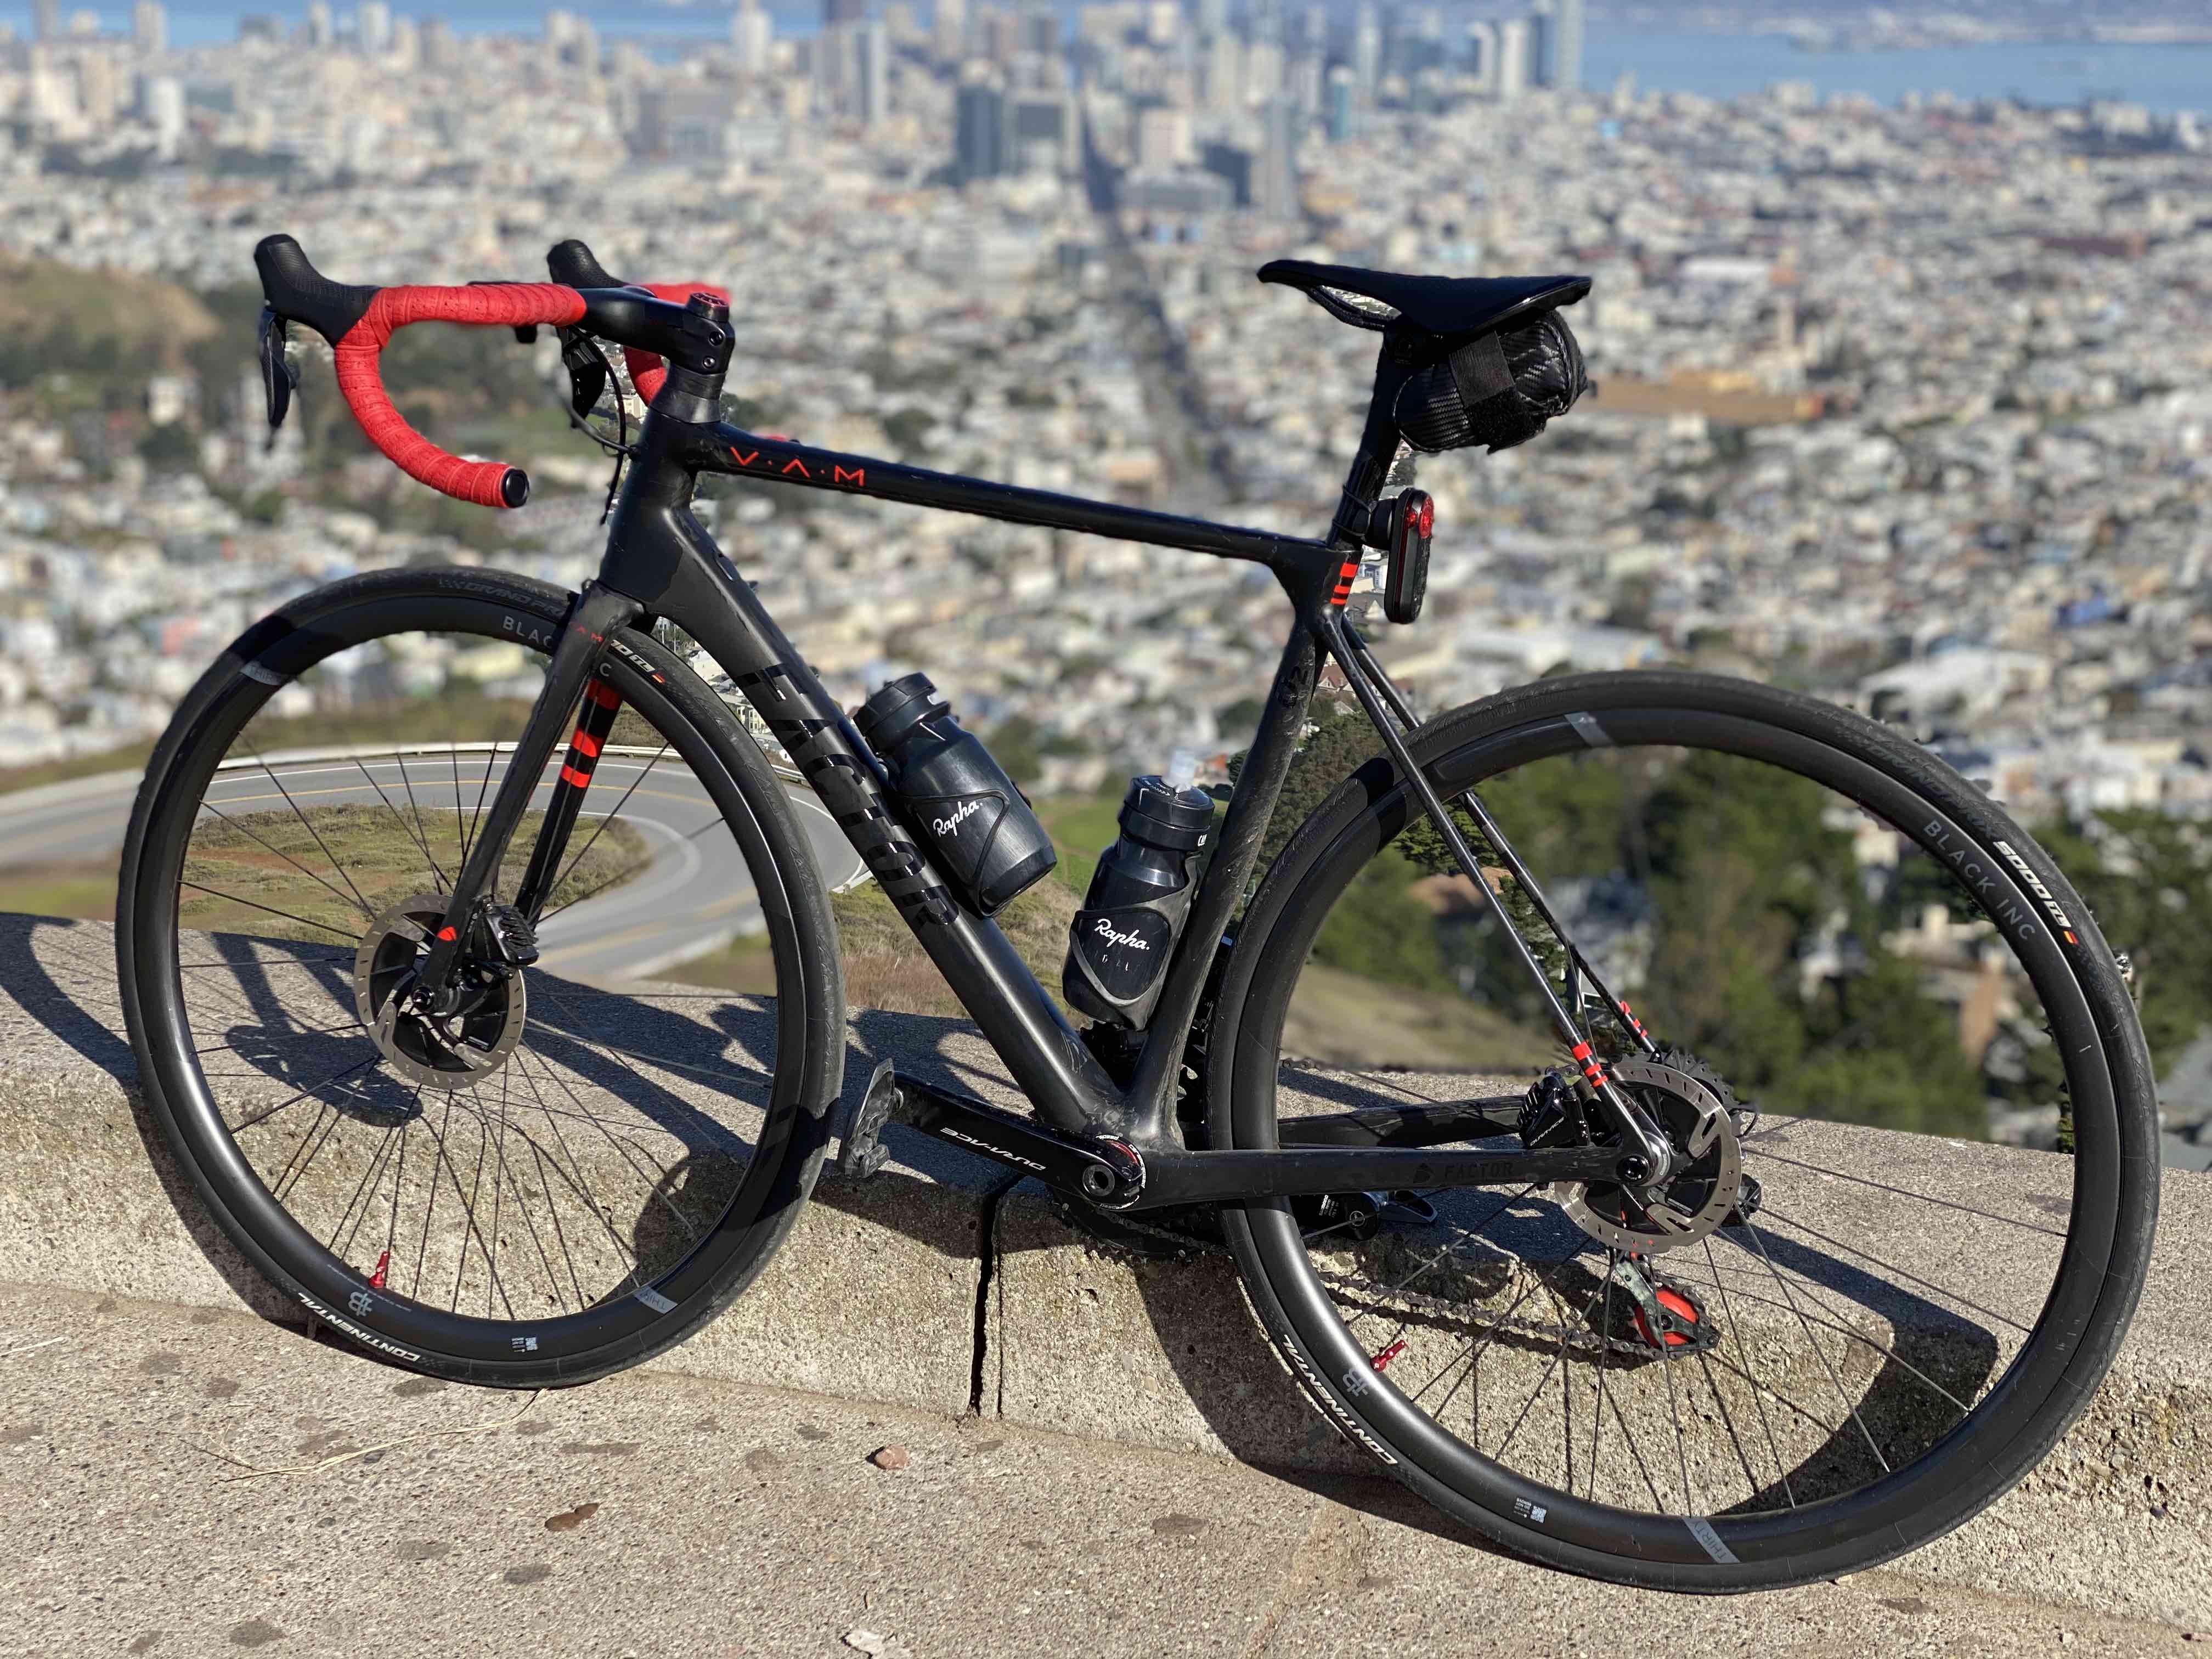 Factor O2 VAM bicycle leaning against the wall at Twin Peaks in San Francisco, California